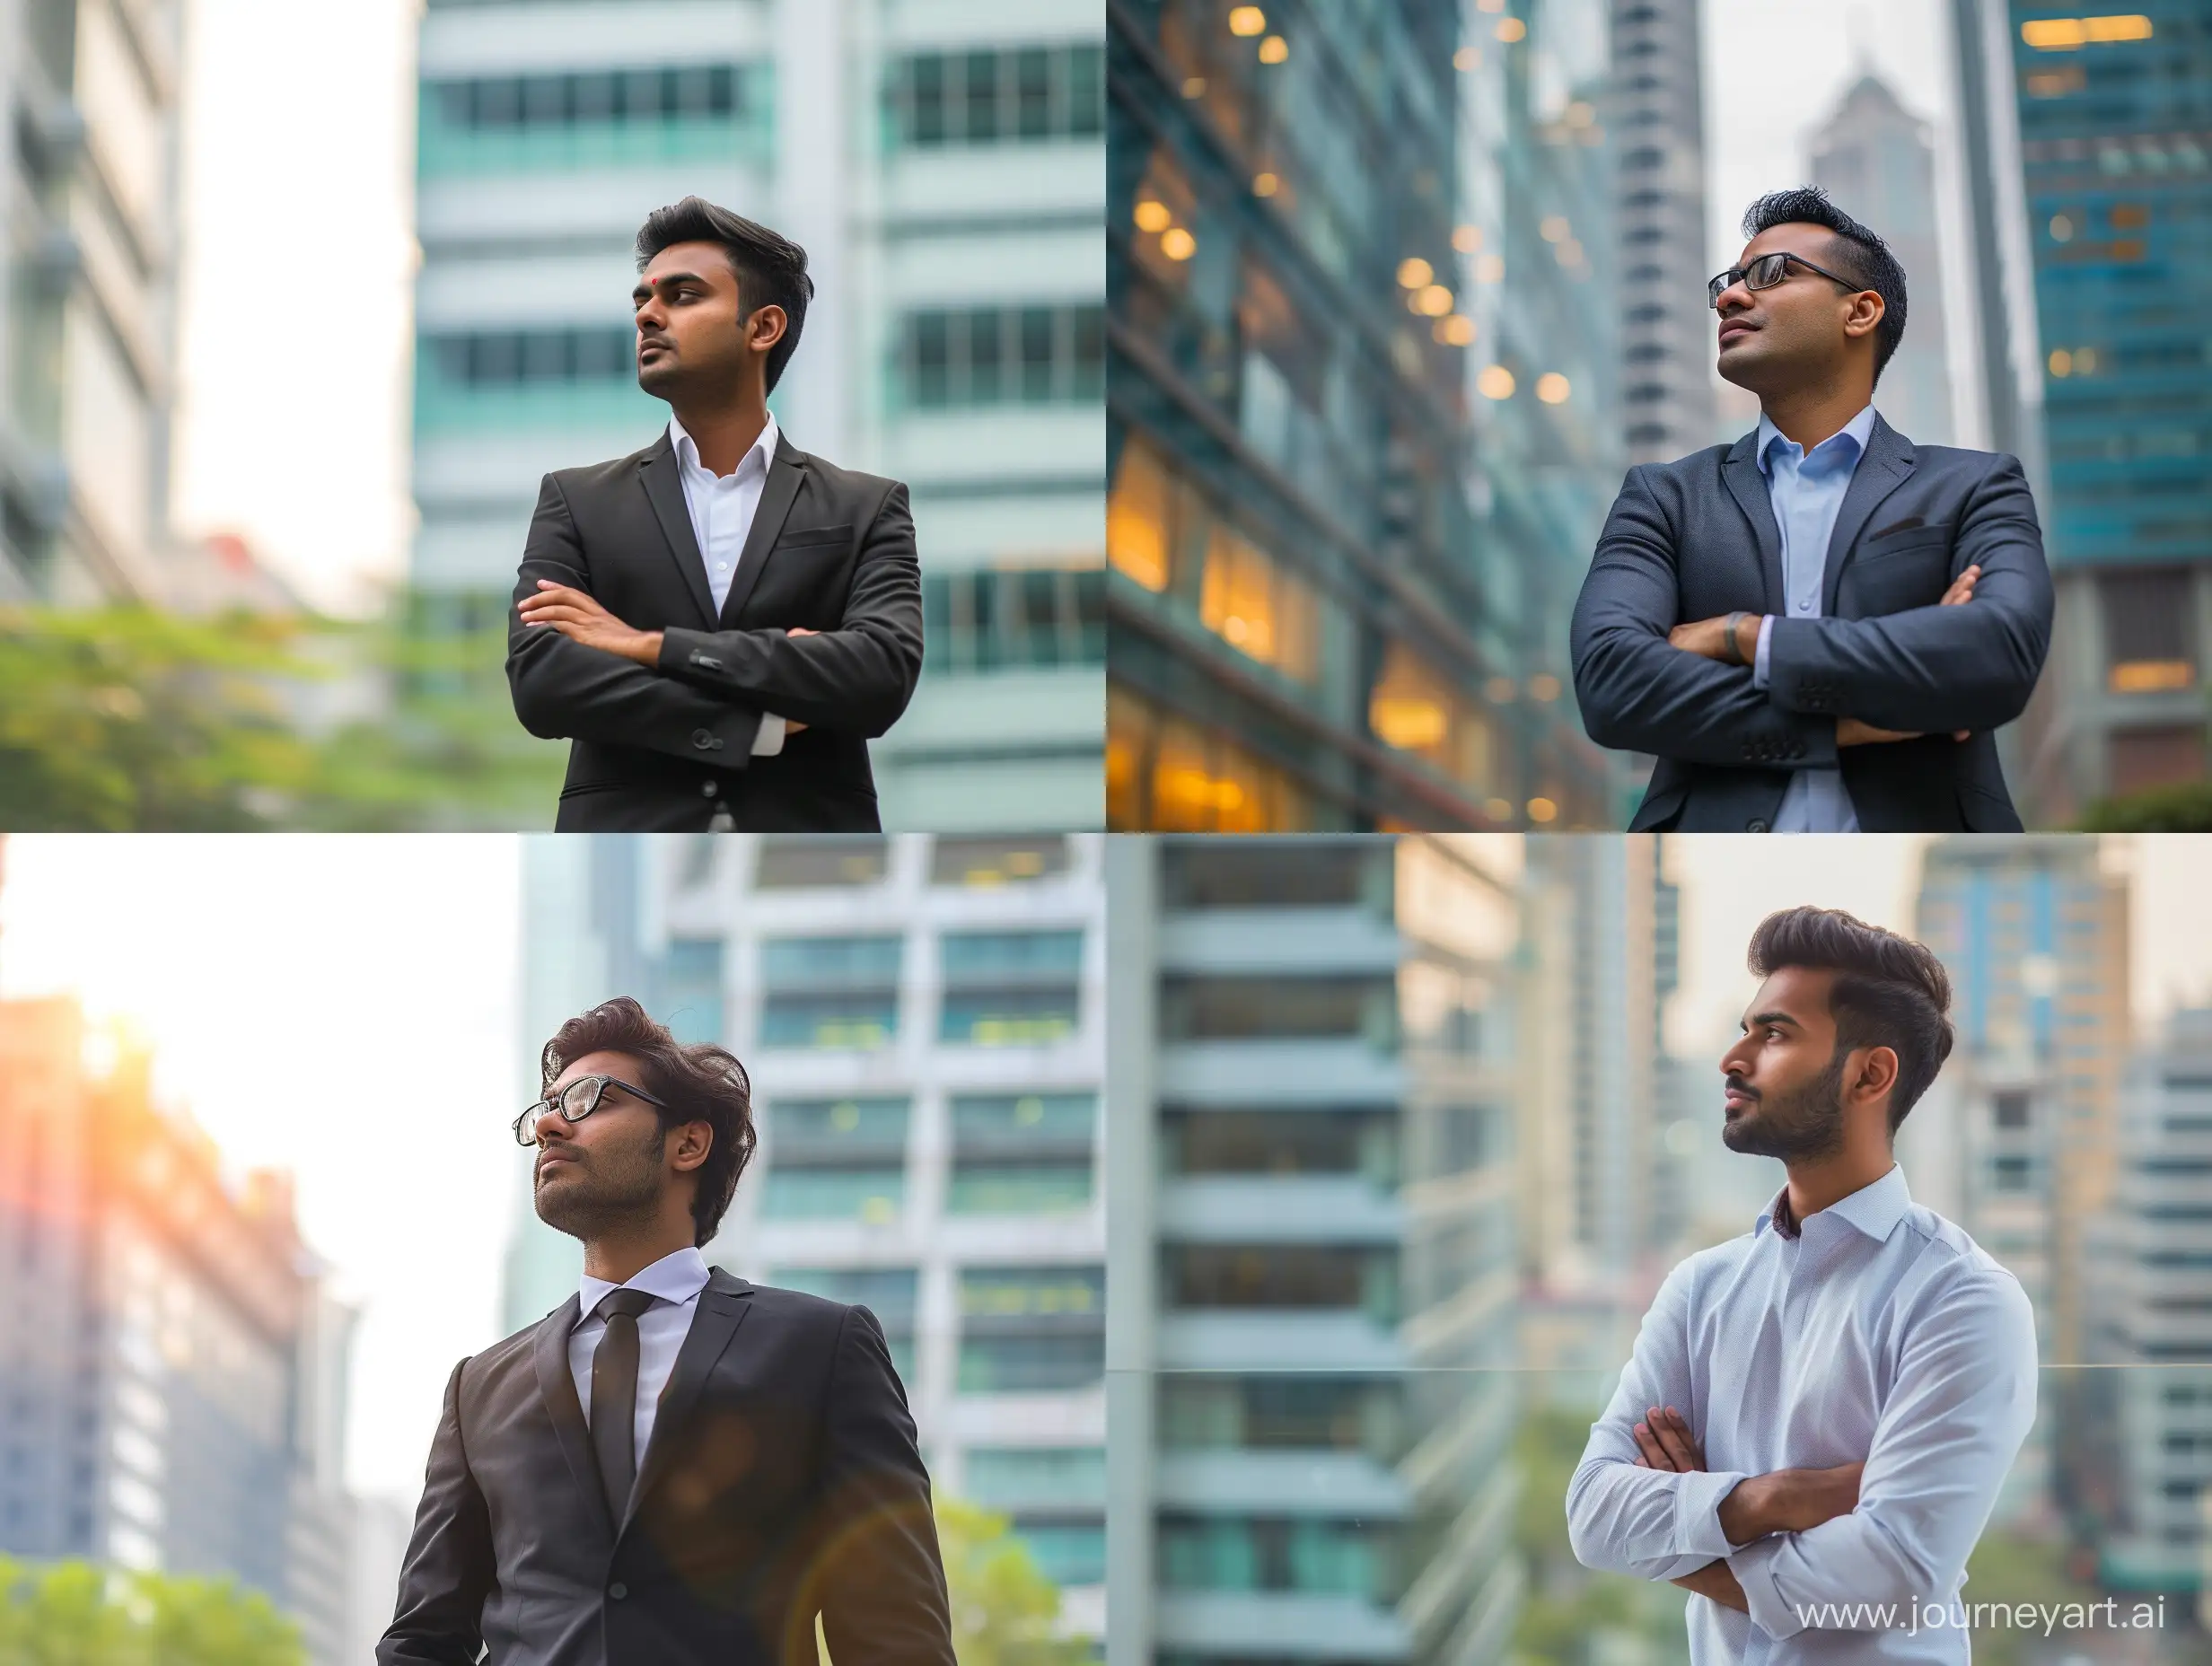 Confident rich eastern indian business man executive standing in modern big city looking and dreaming of future business success, thinking of new goals, business vision and leadership concept.